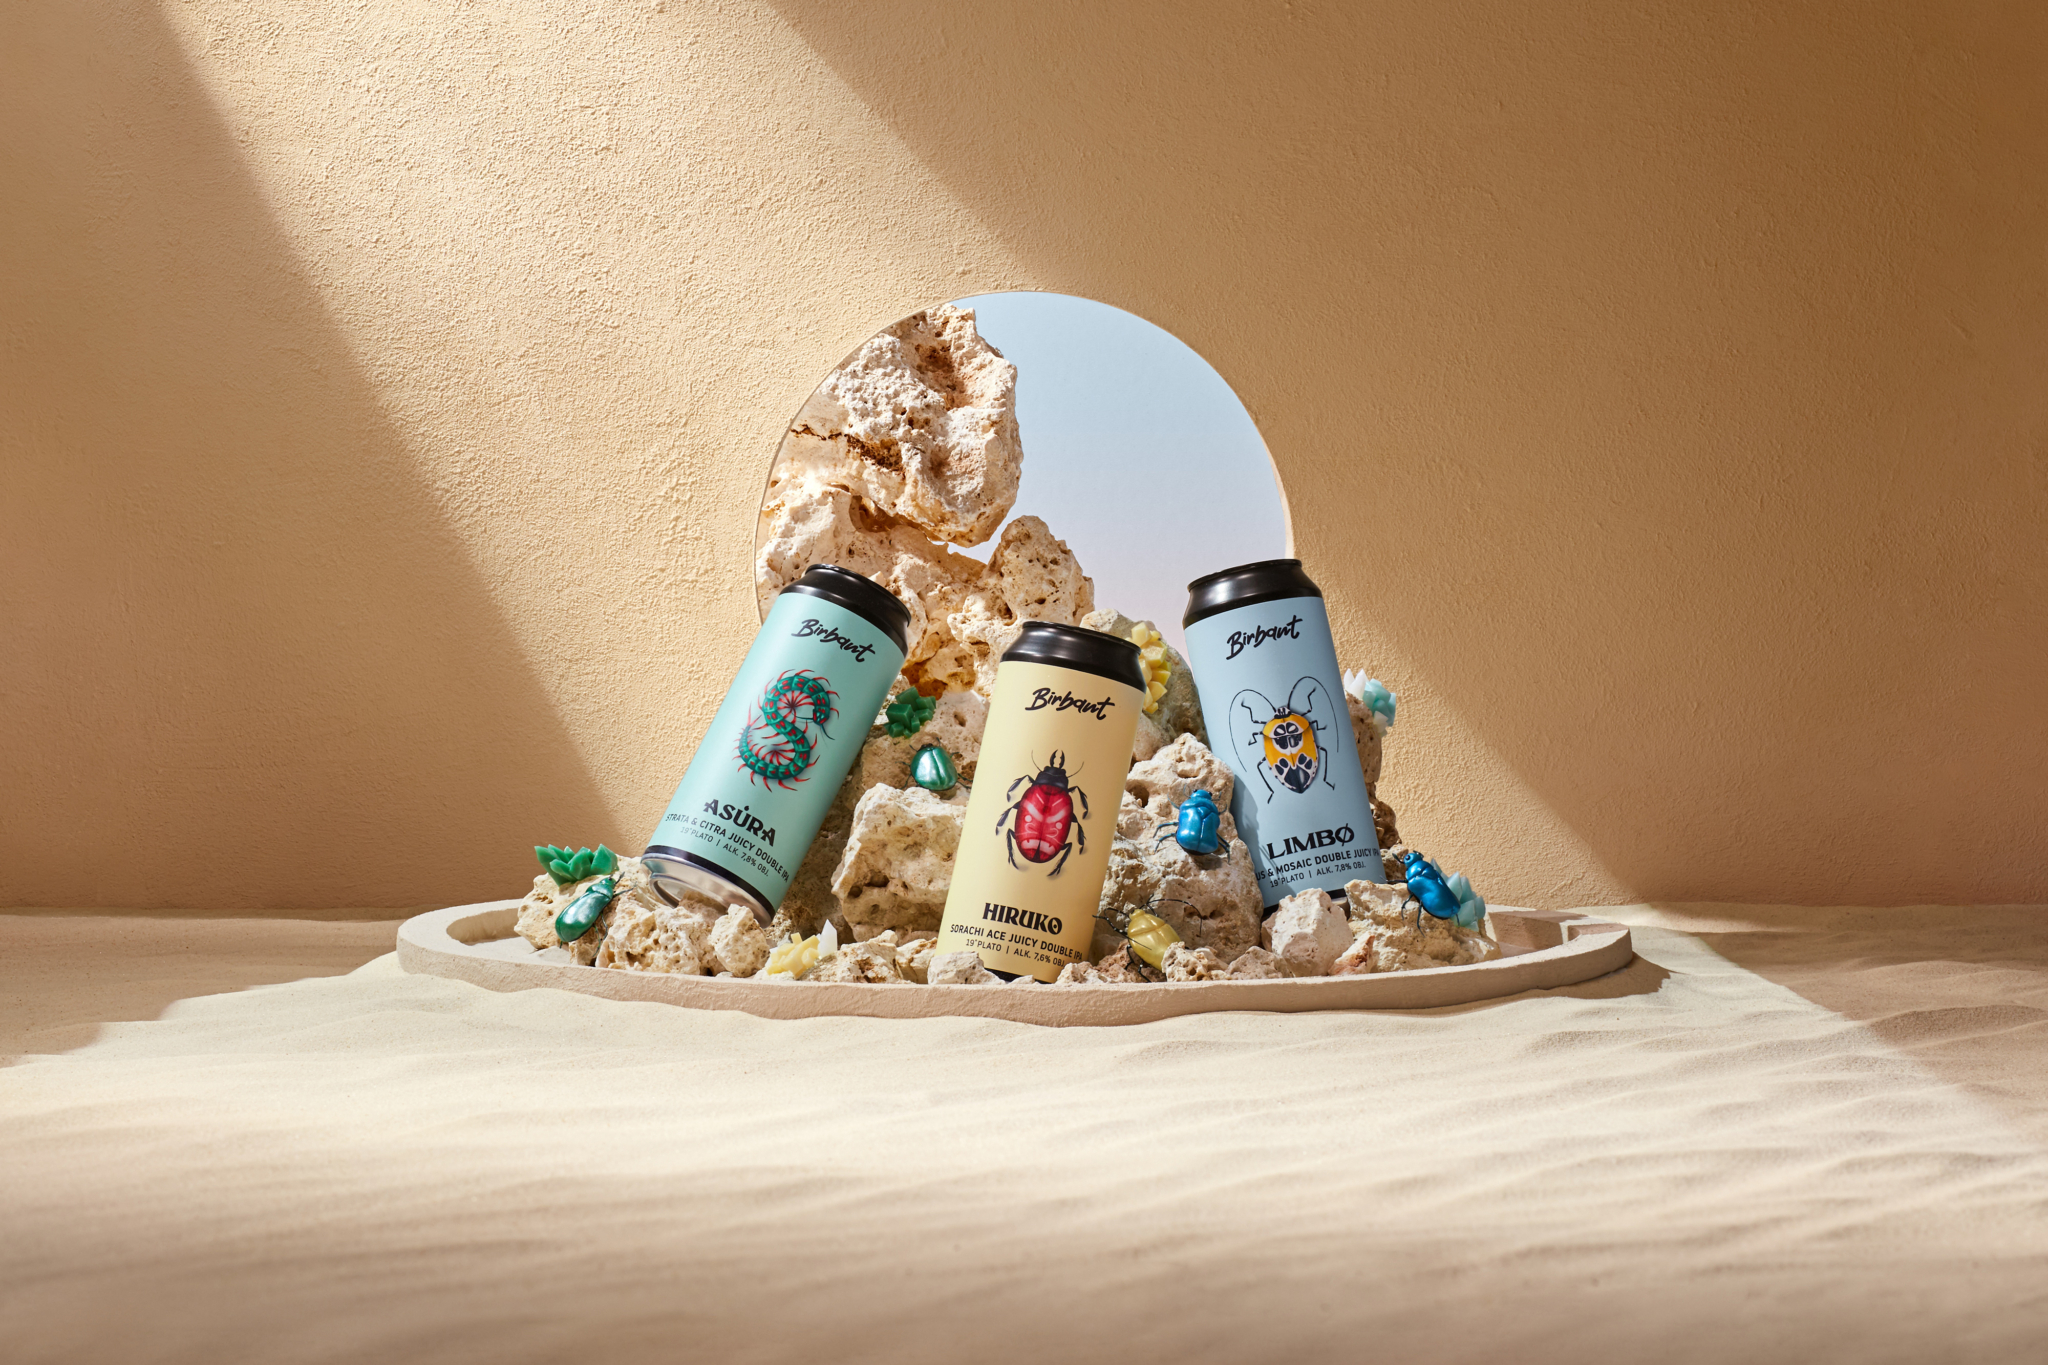 Photo of beer cans on sand scene